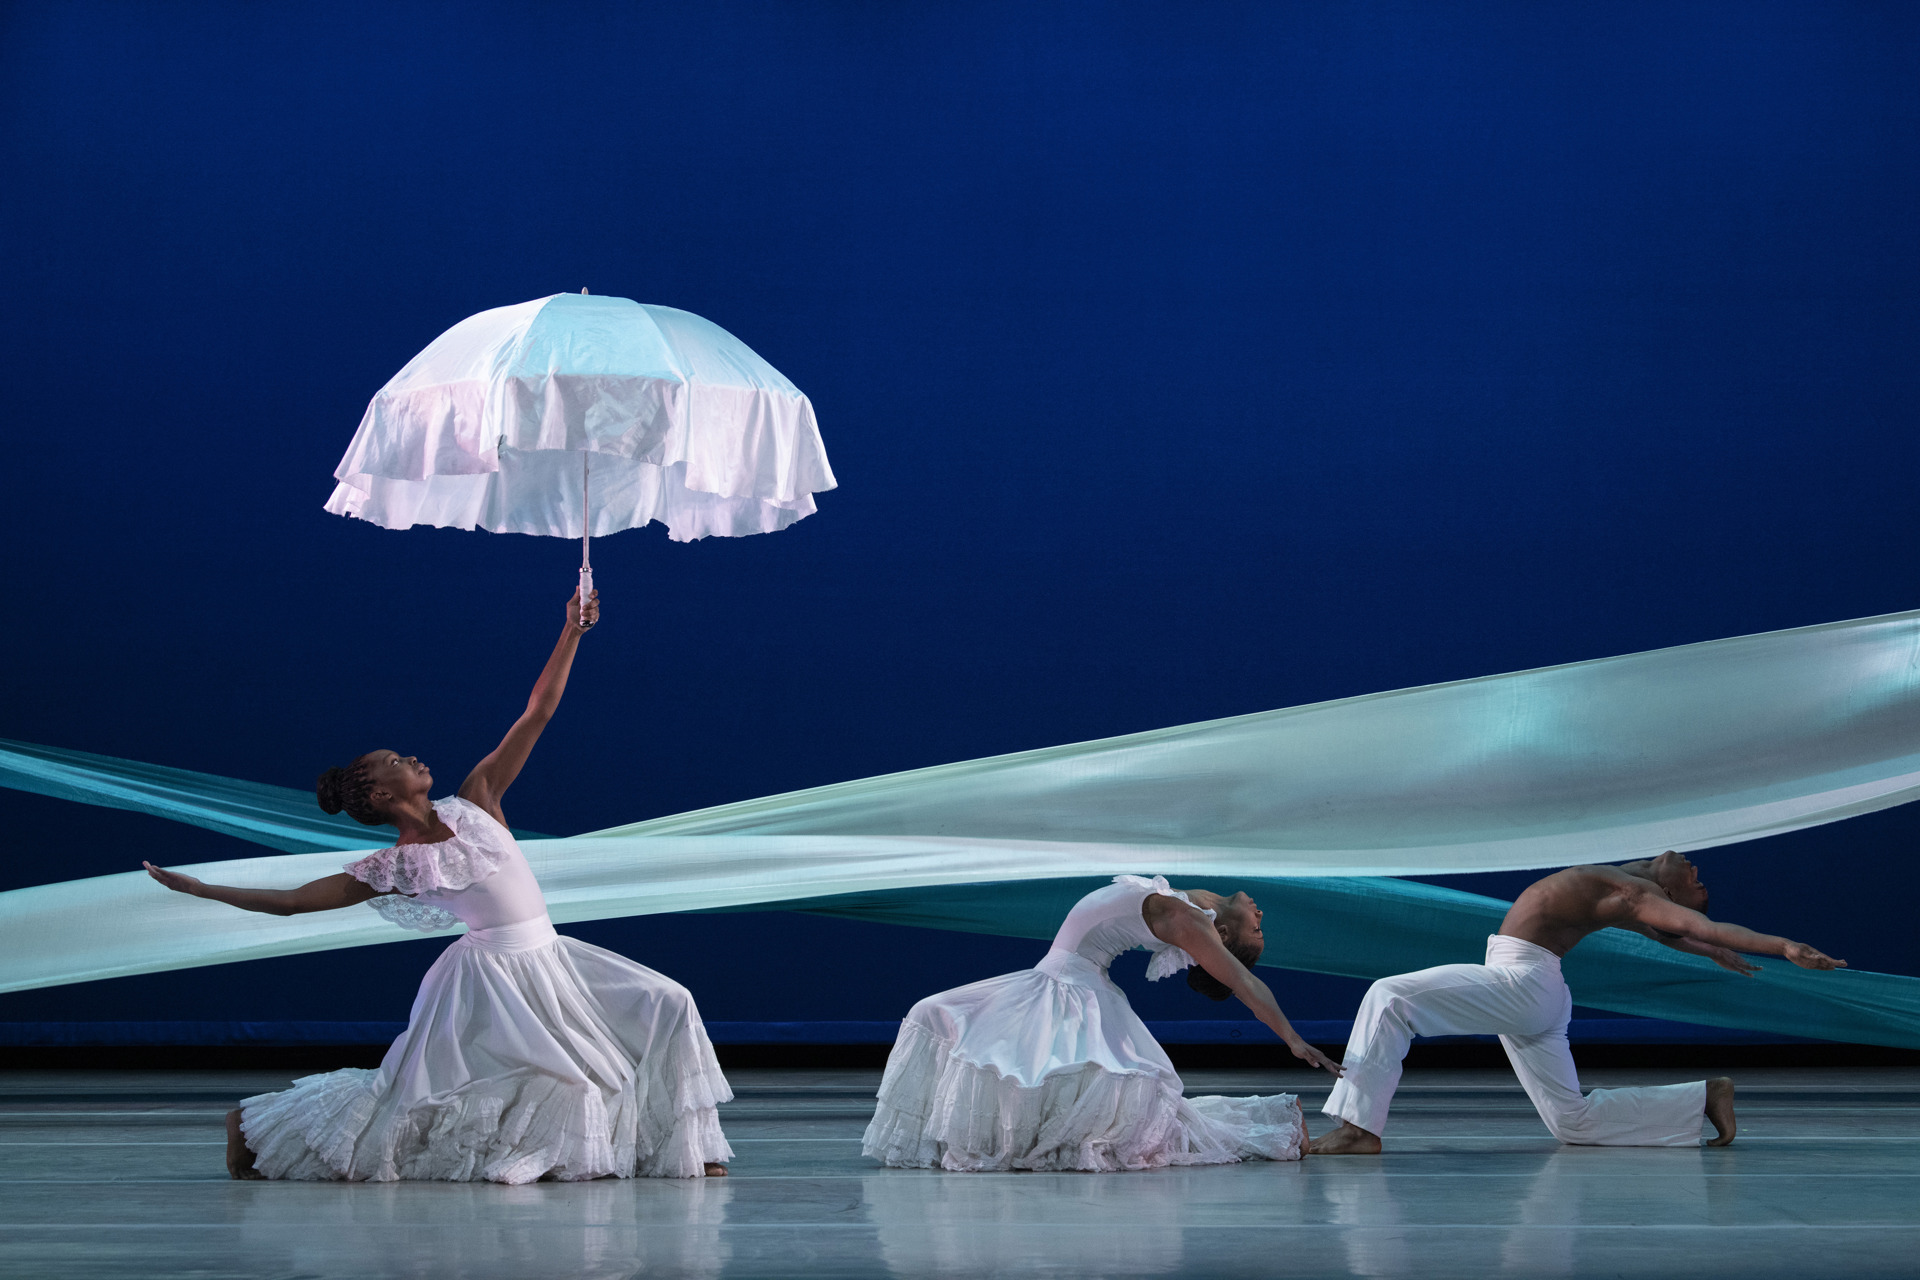 three global majority dancers on a blue stage with a blue ribbon graphic behind them. Female to the left lunging and leaning back holding up a white umbrella. Two male and female dancers on the right hand side lunging and arching back. All wearing white.